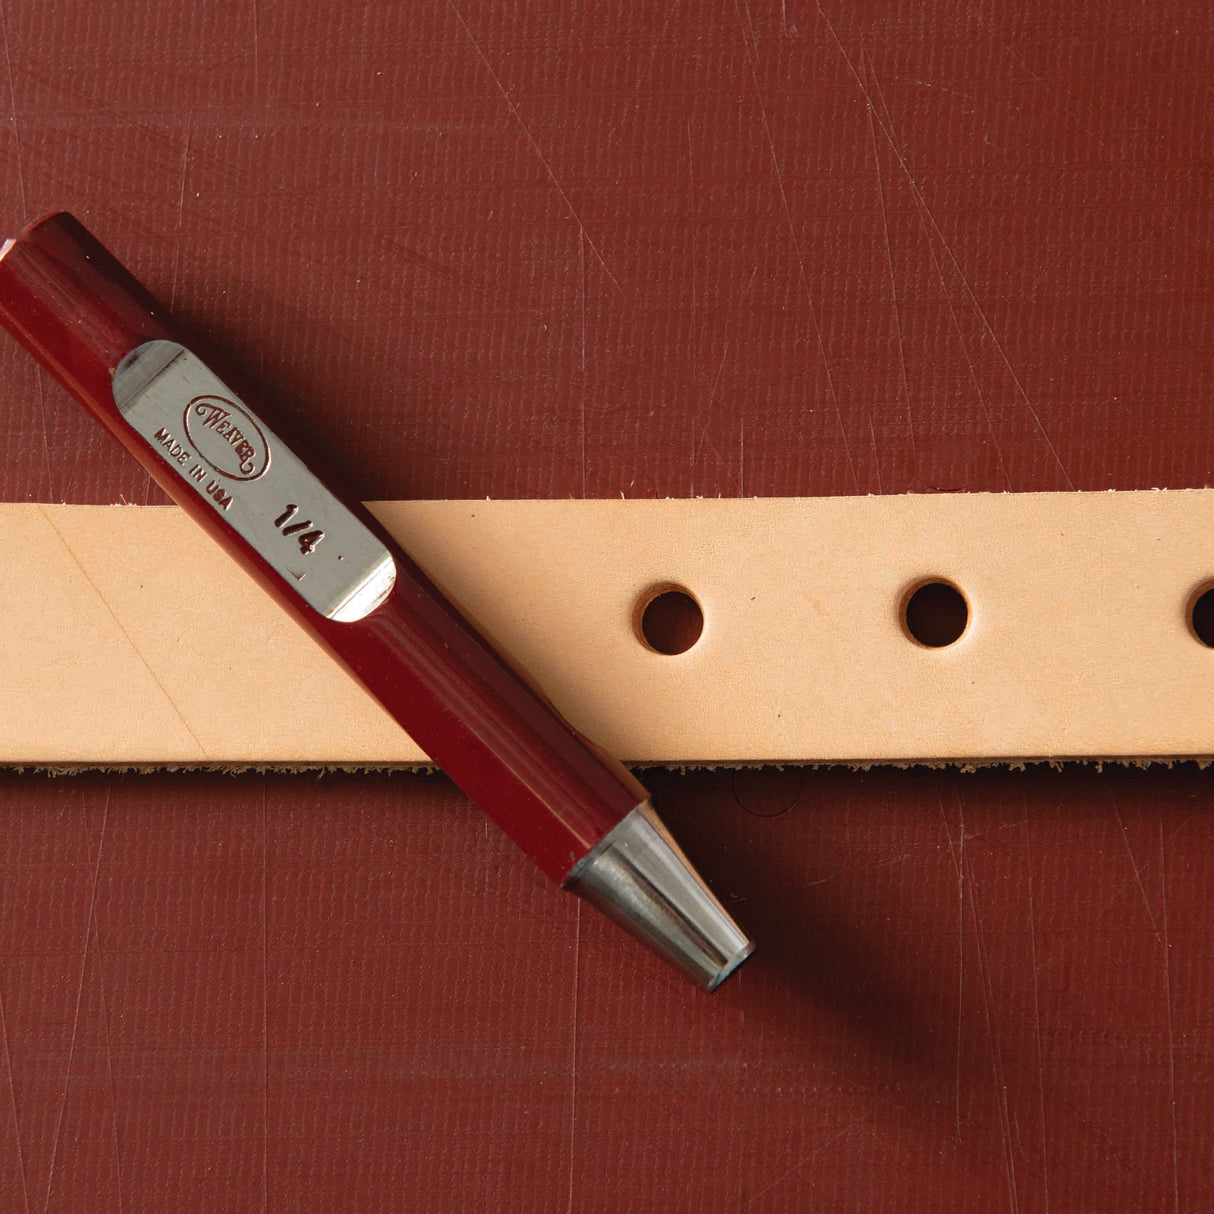 Wholesale leather hole punch tool Crafted To Perform Many Other Tasks 